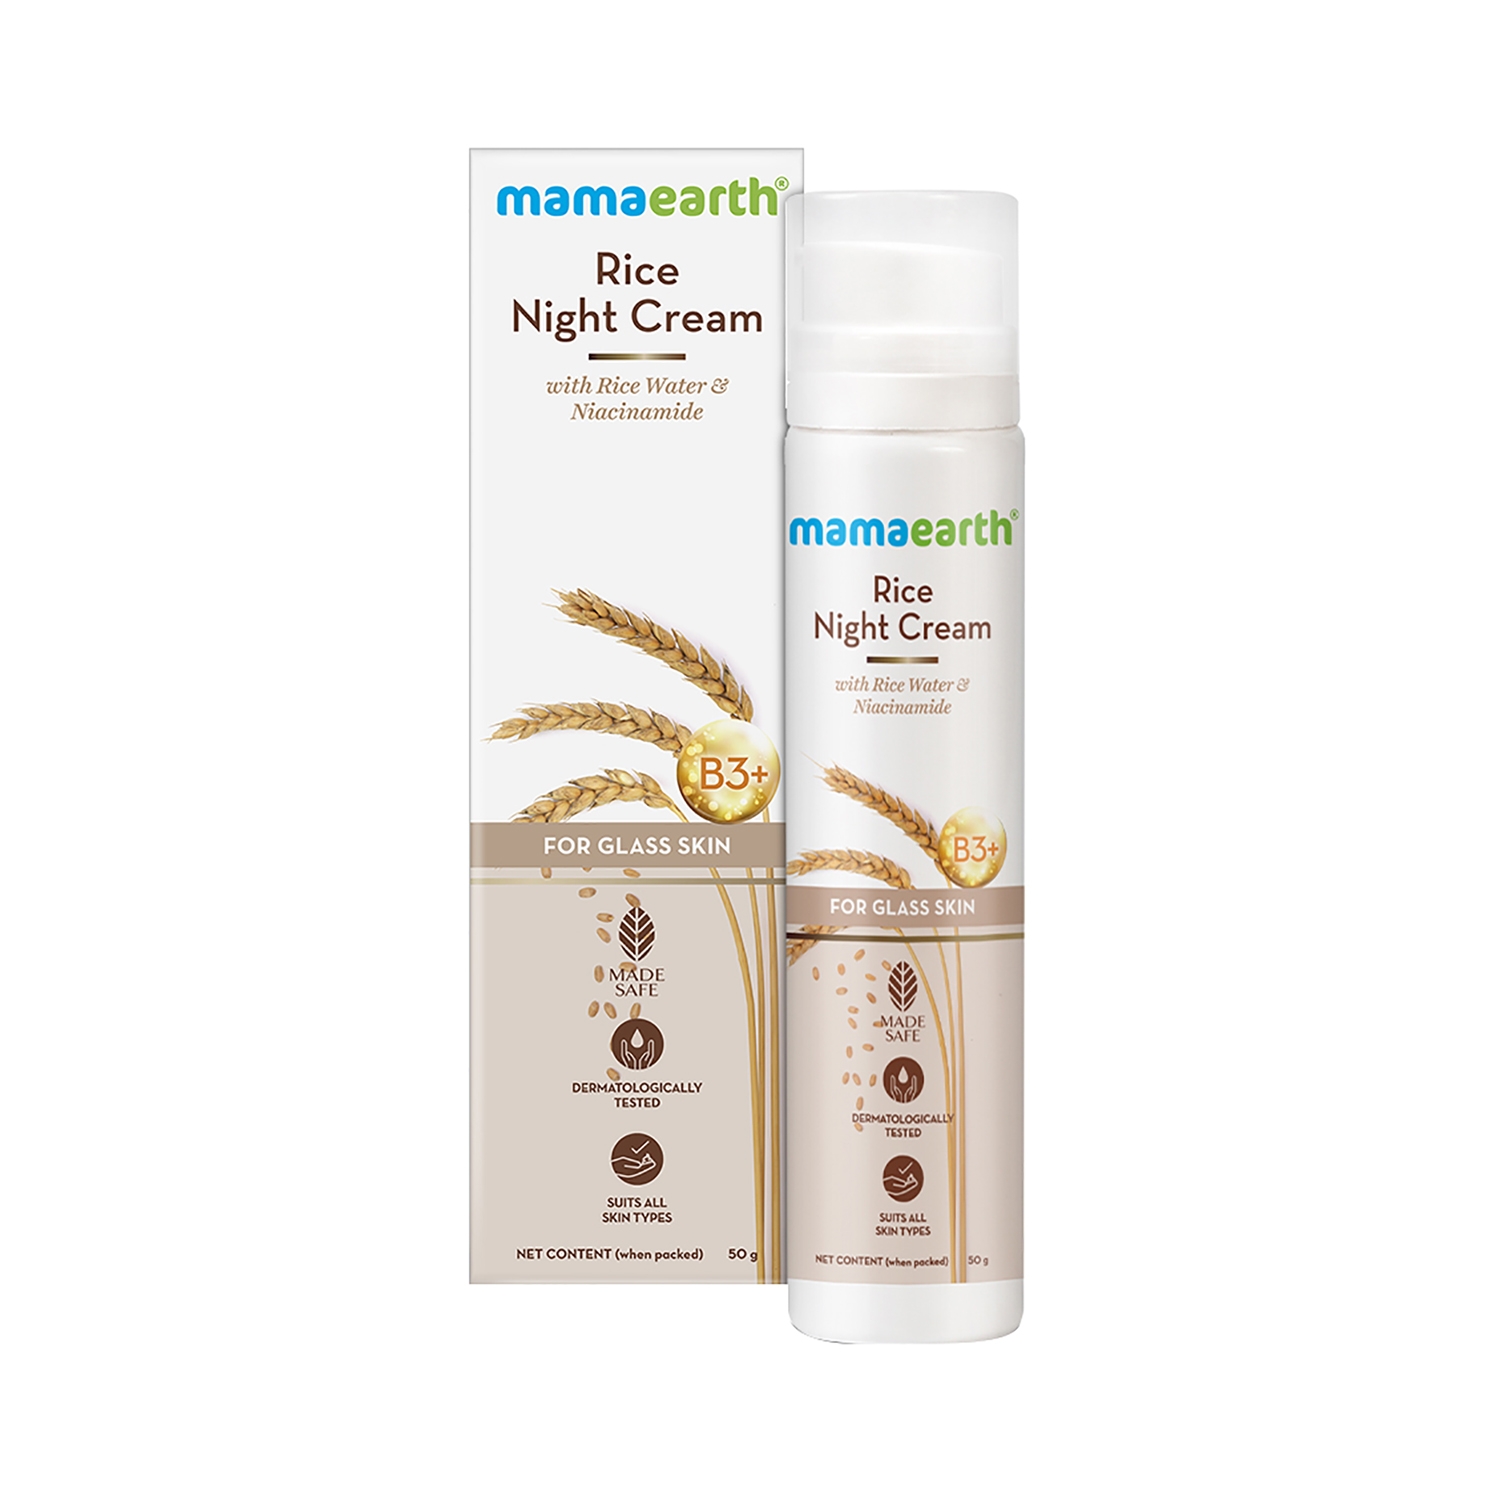 Mamaearth | Mamaearth Rice Night Cream With Rice Water & Niacinamide For Glass Skin (50g)